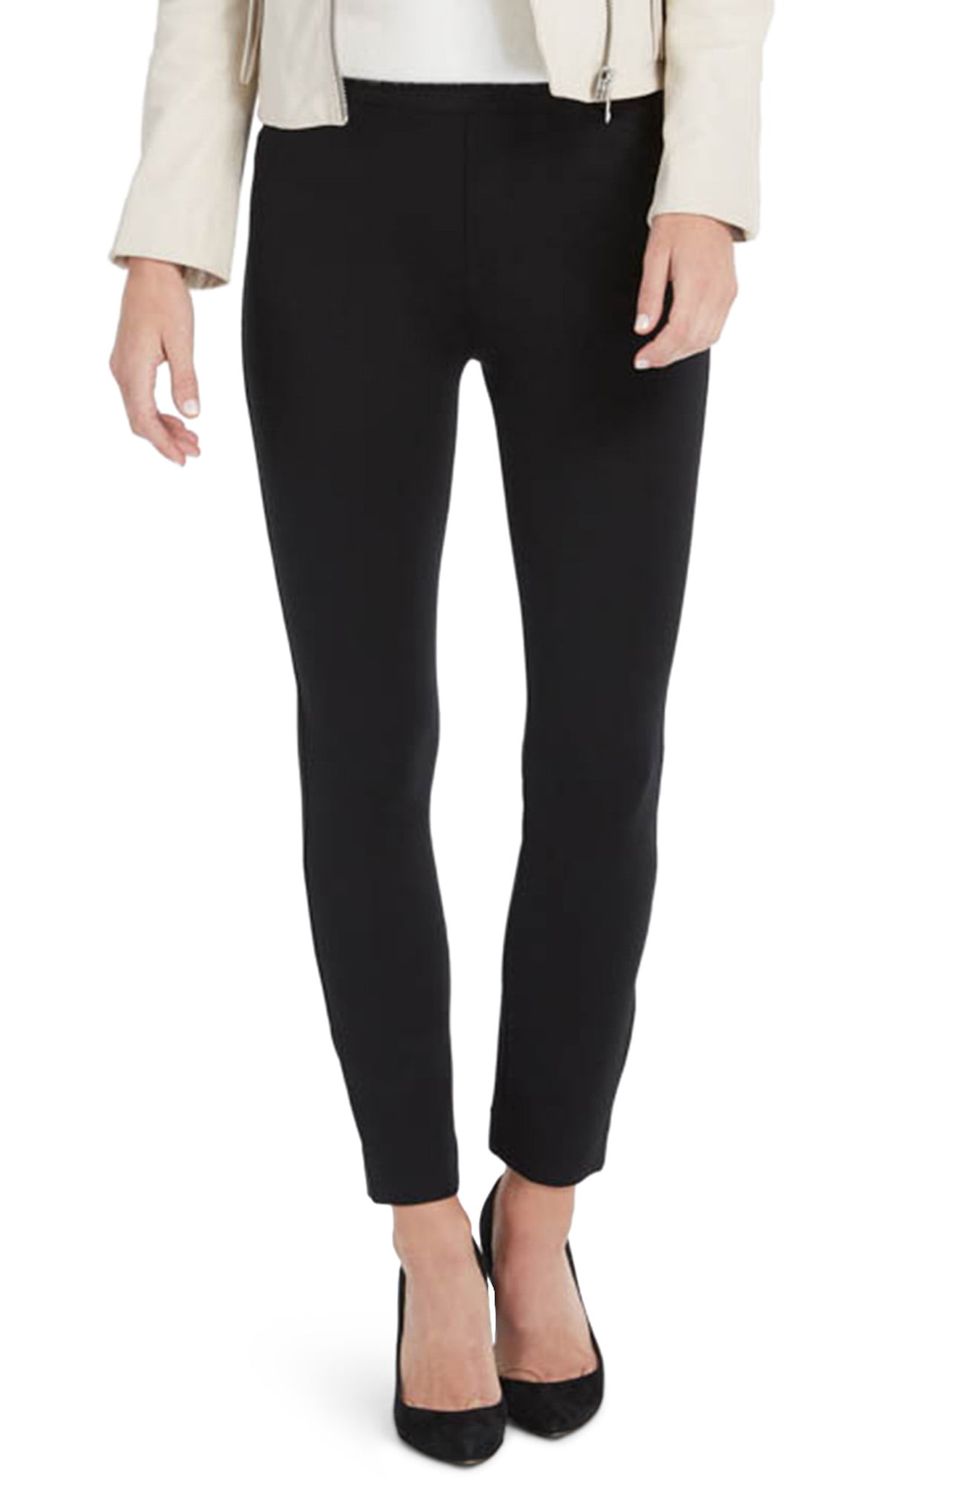 Oprah's 'Favorite' Spanx Pants Are Available in Two New Styles